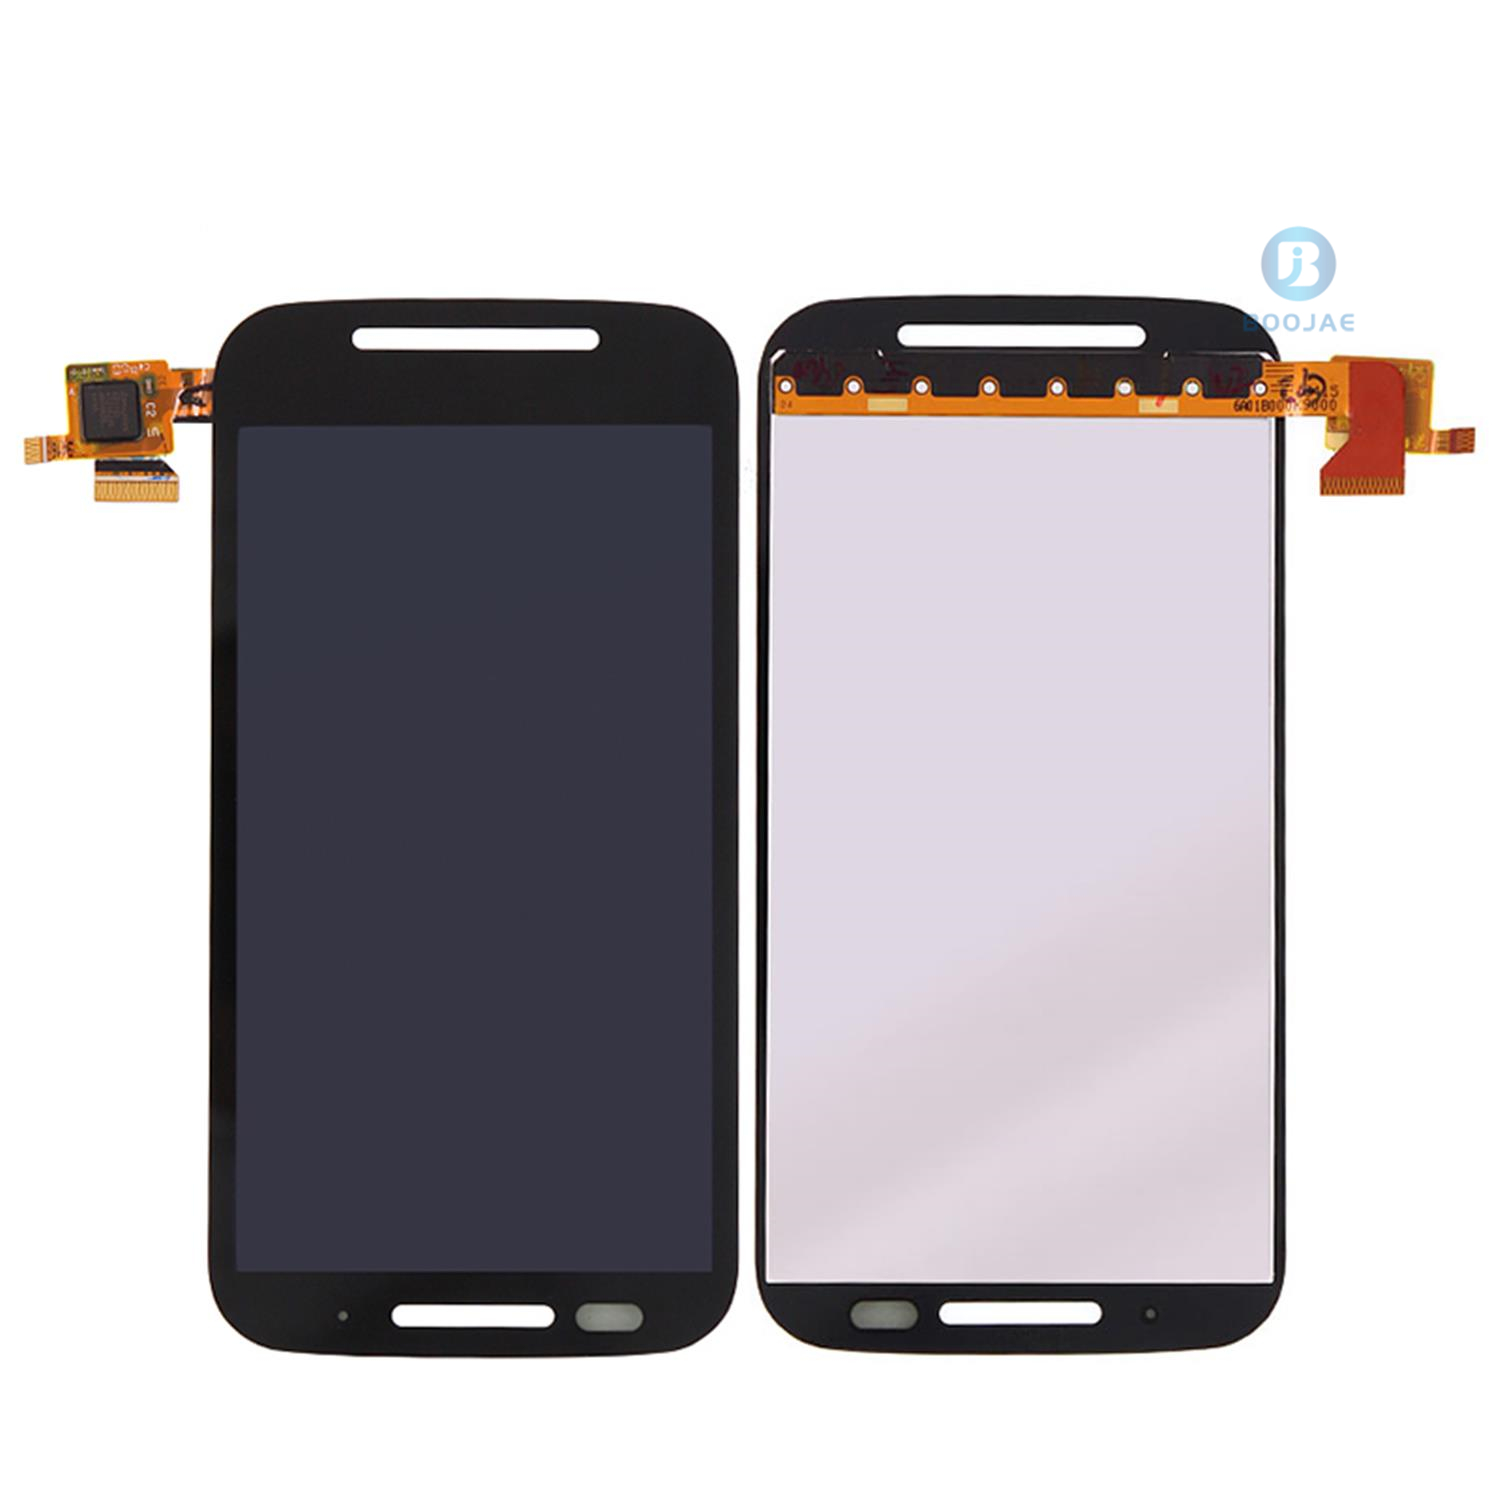 For Motorola Moto XT1022 LCD Screen Display and Touch Panel Digitizer Assembly Replacement